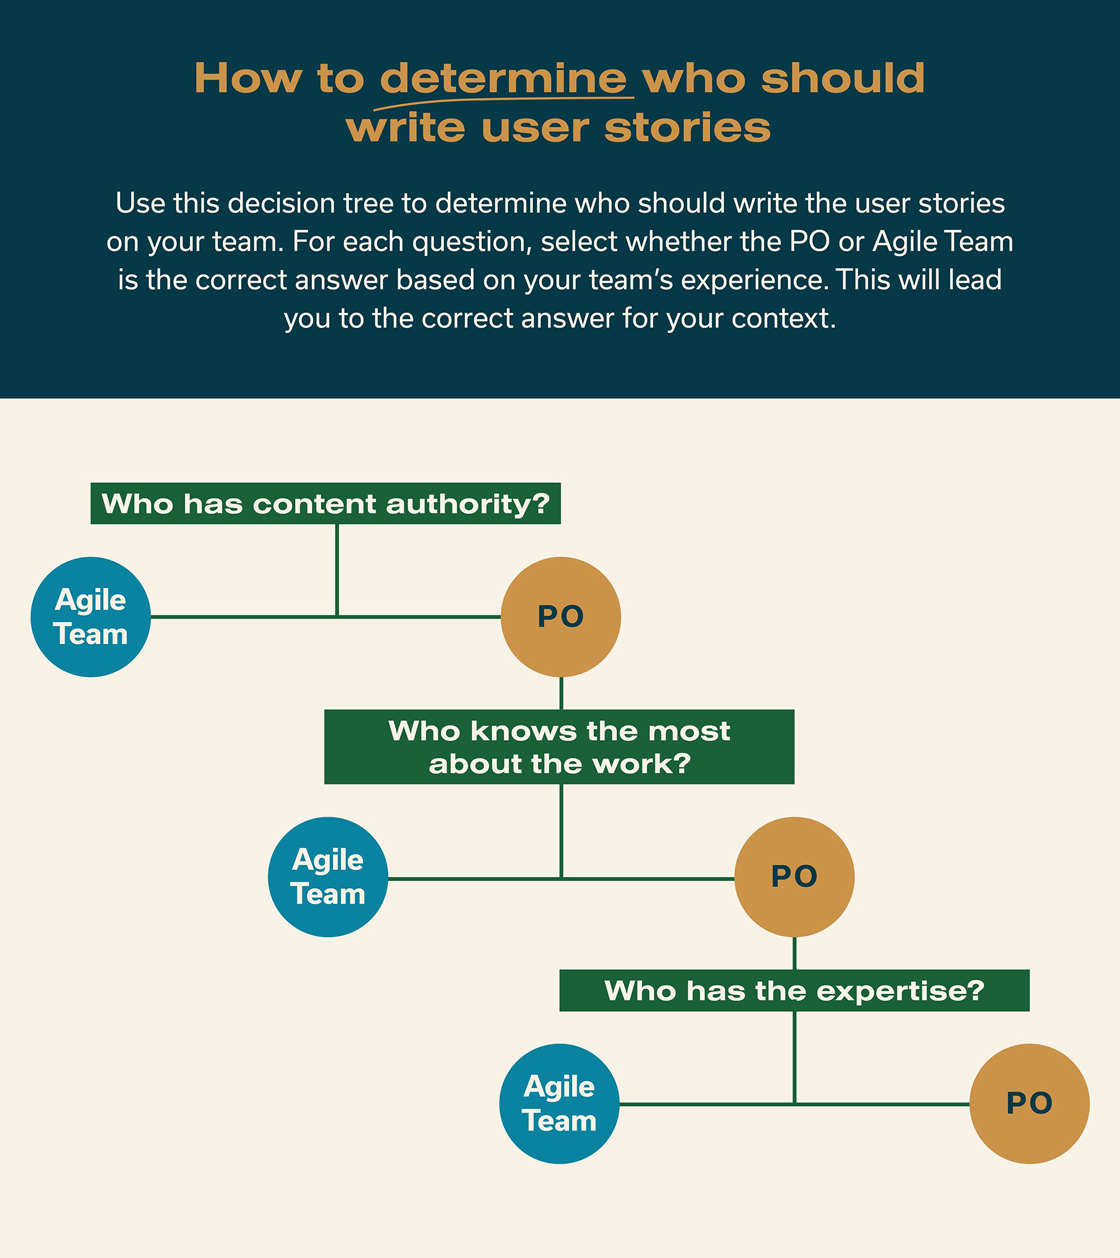 How to determine who should write user stories